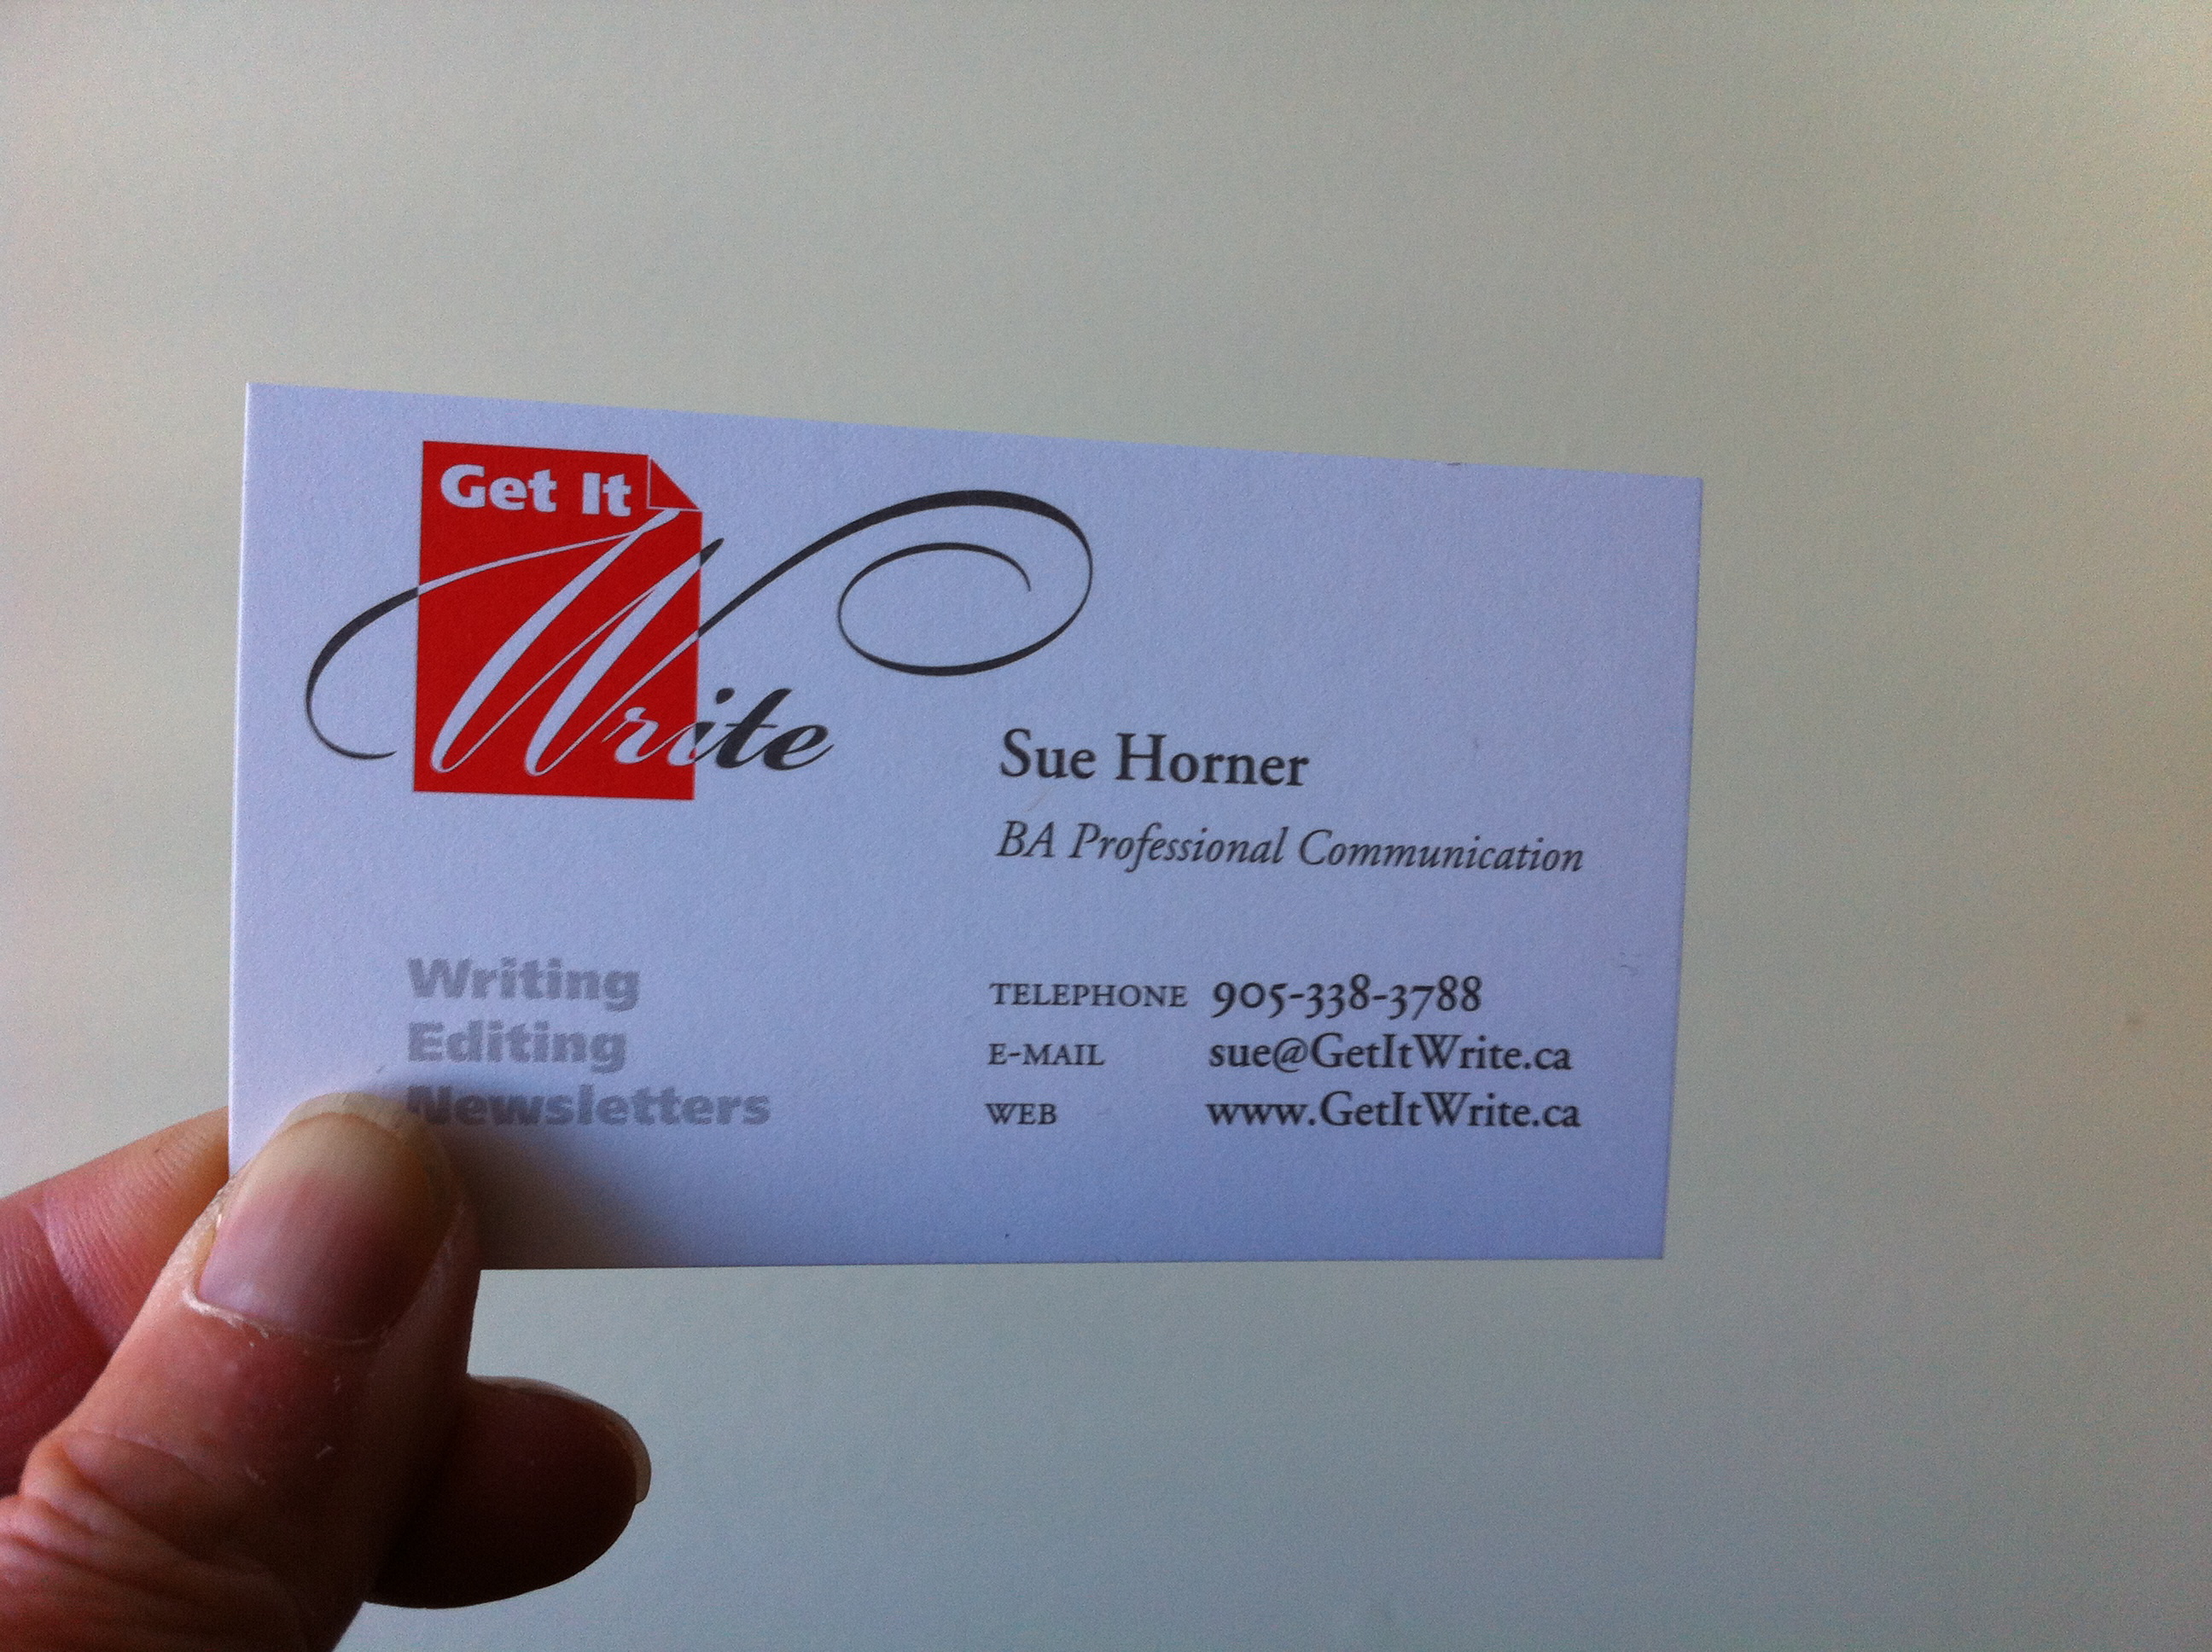 Sue's business card